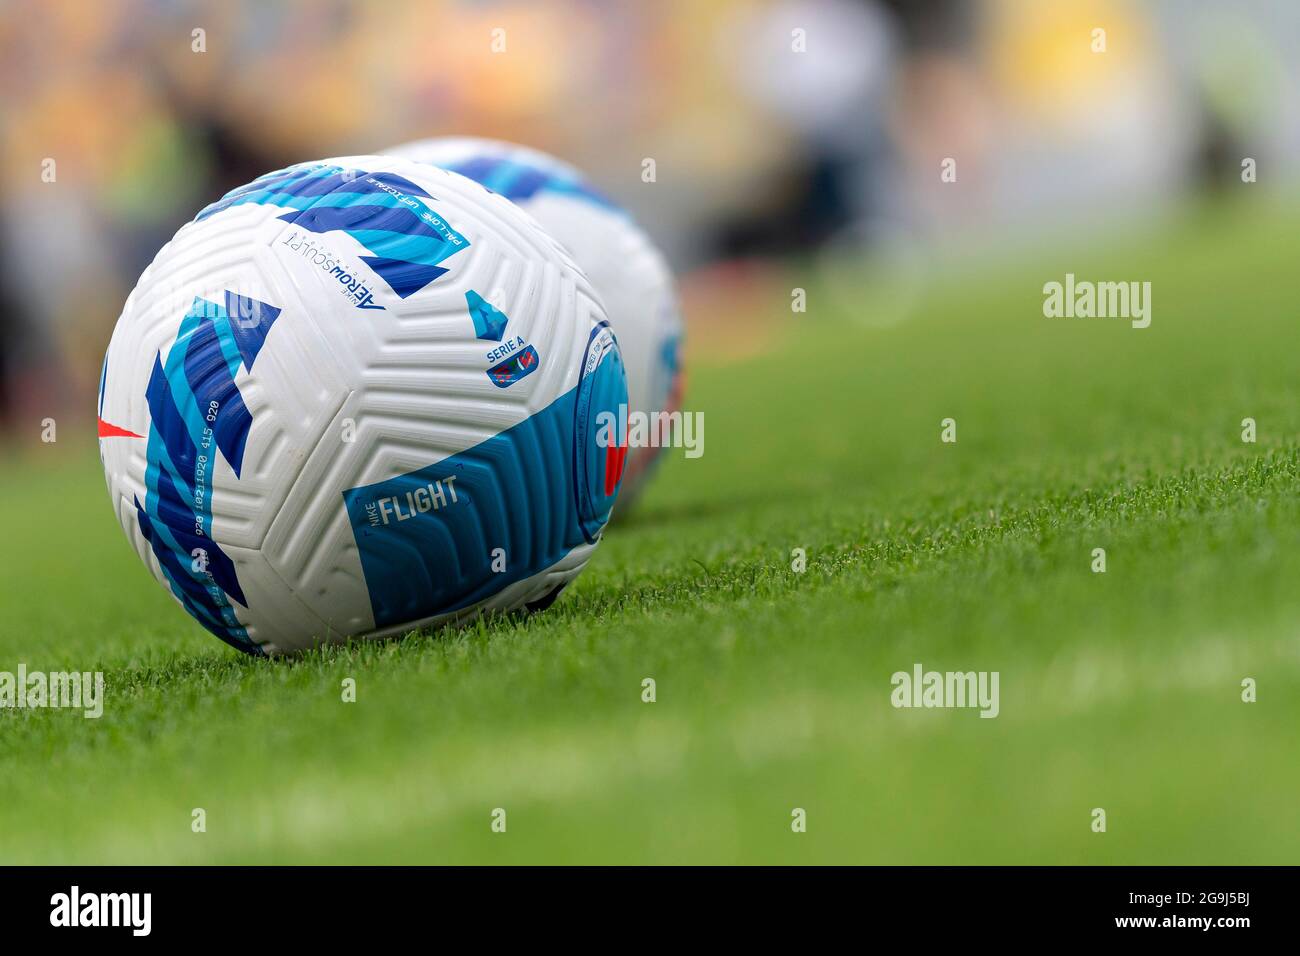 Frosinone, Italy. 25th July, 2021. Serie A Nike official balls, named  flight, are seen on the pitch during the pre season friendly football match  between AS Roma and Debrecen at Benito Stirpe